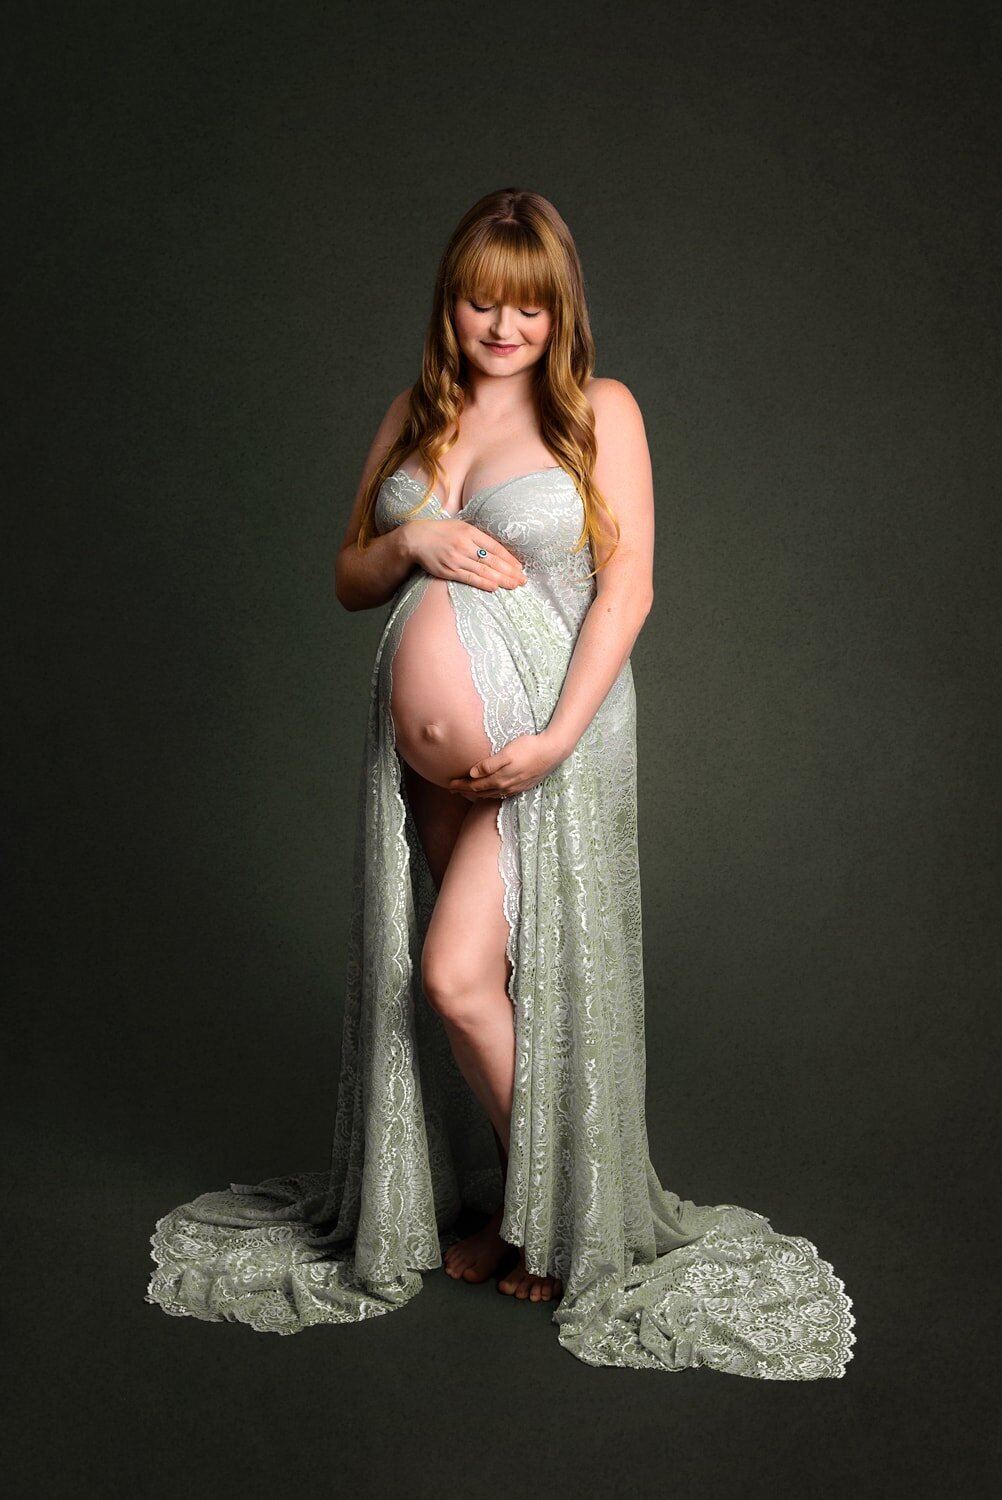 Gastown Vancouver Classic Dramatic Studio Maternity Photography